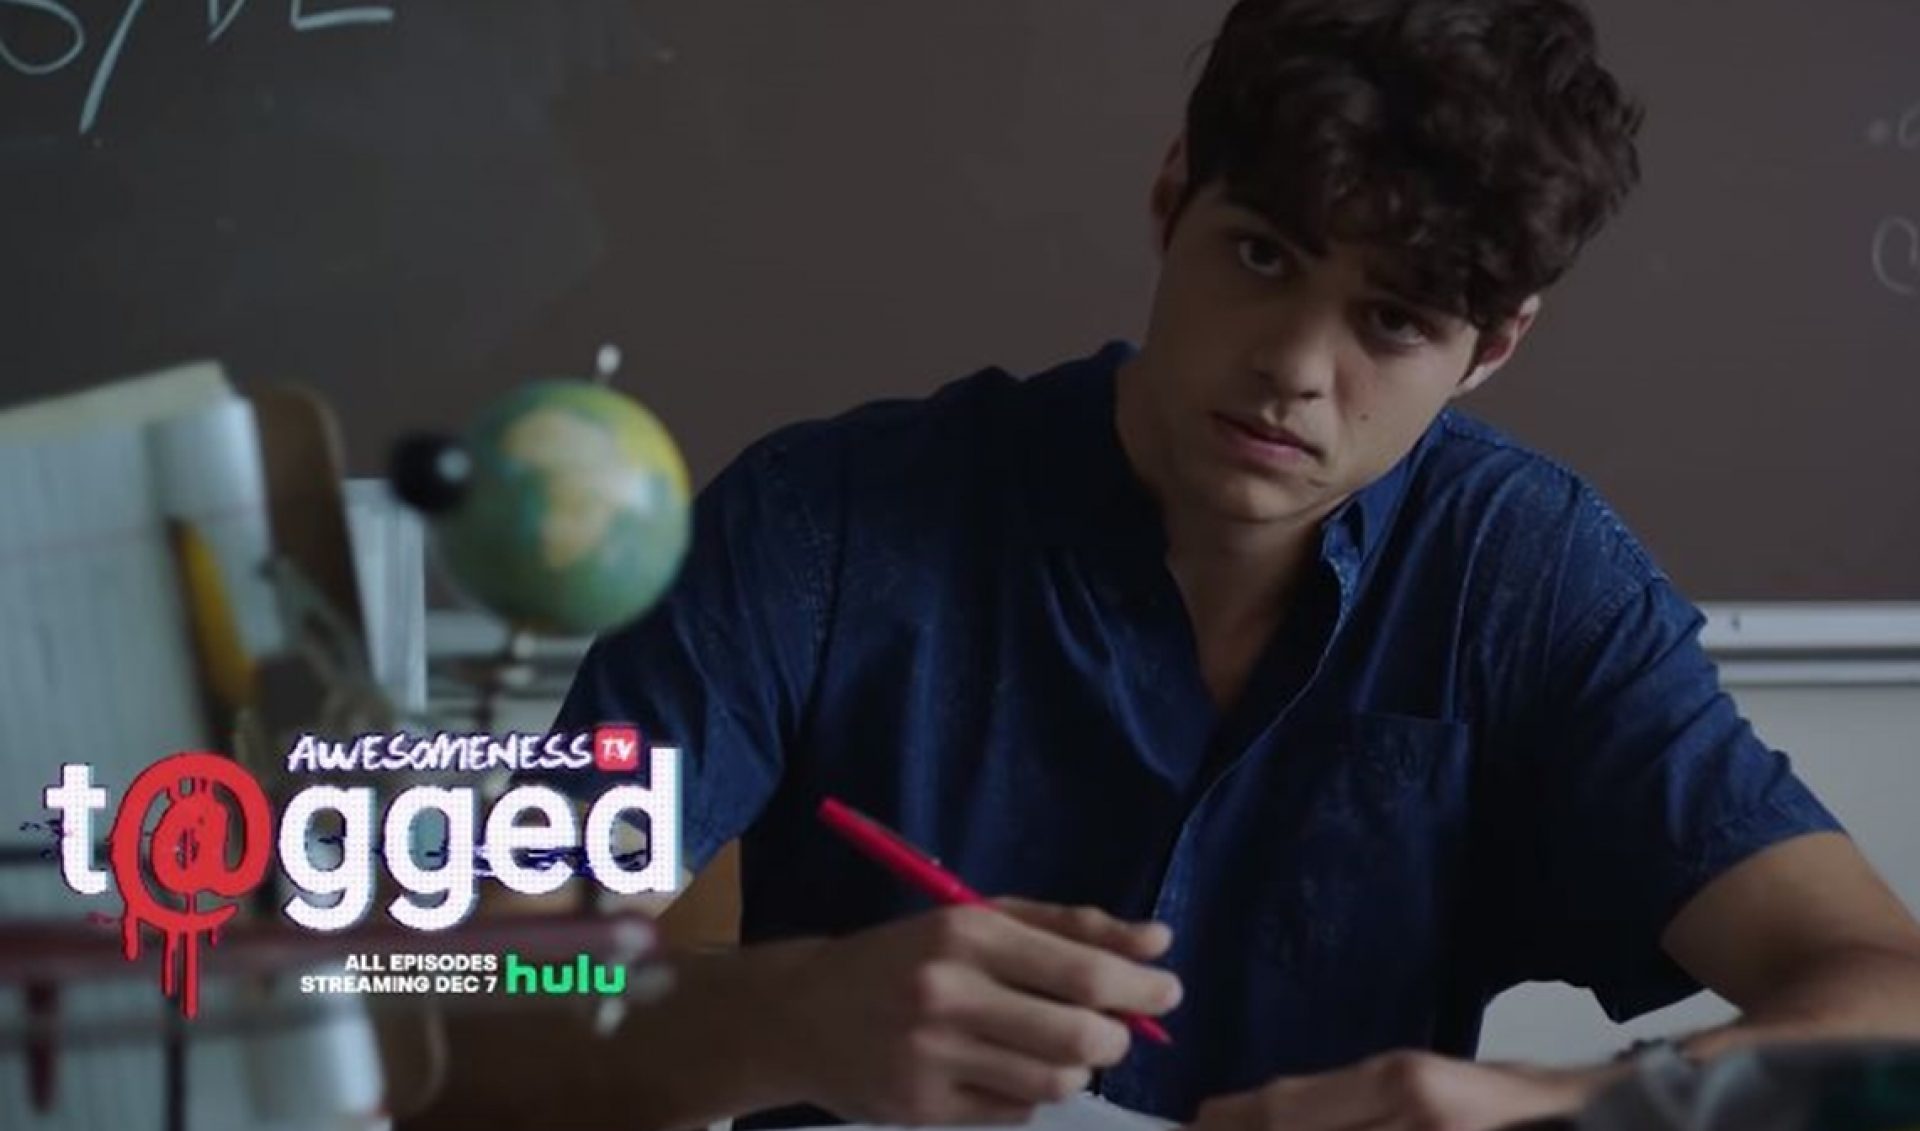 AwesomenessTV Thriller ‘T@gged’ Finds New Home On Hulu After Go90 Shutdown